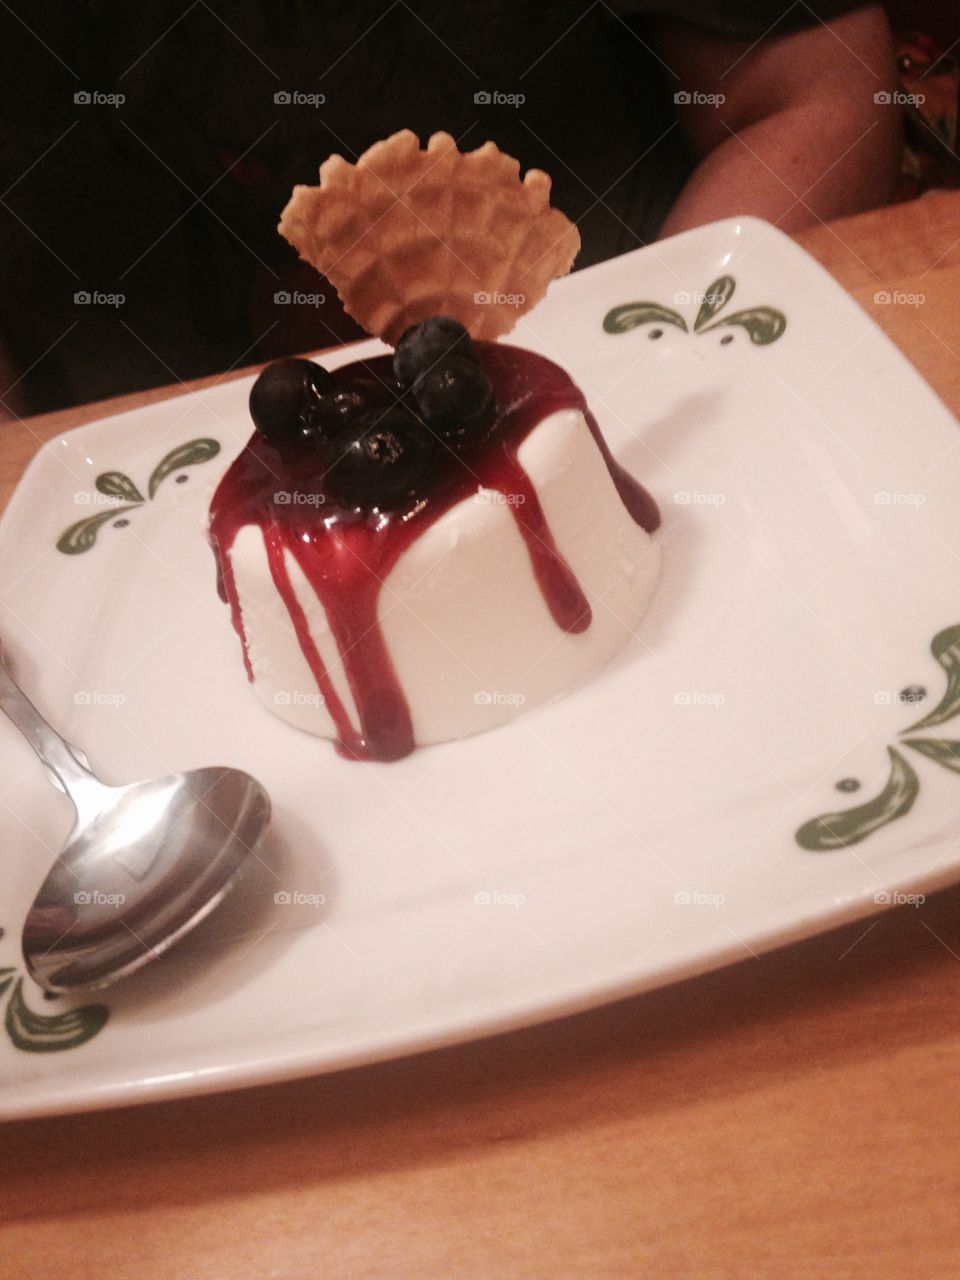 I snapped a photo of a delicious tart my cousin had gotten at Olive Garden. Patterned plate and lovely delicate food with waffle on top. 